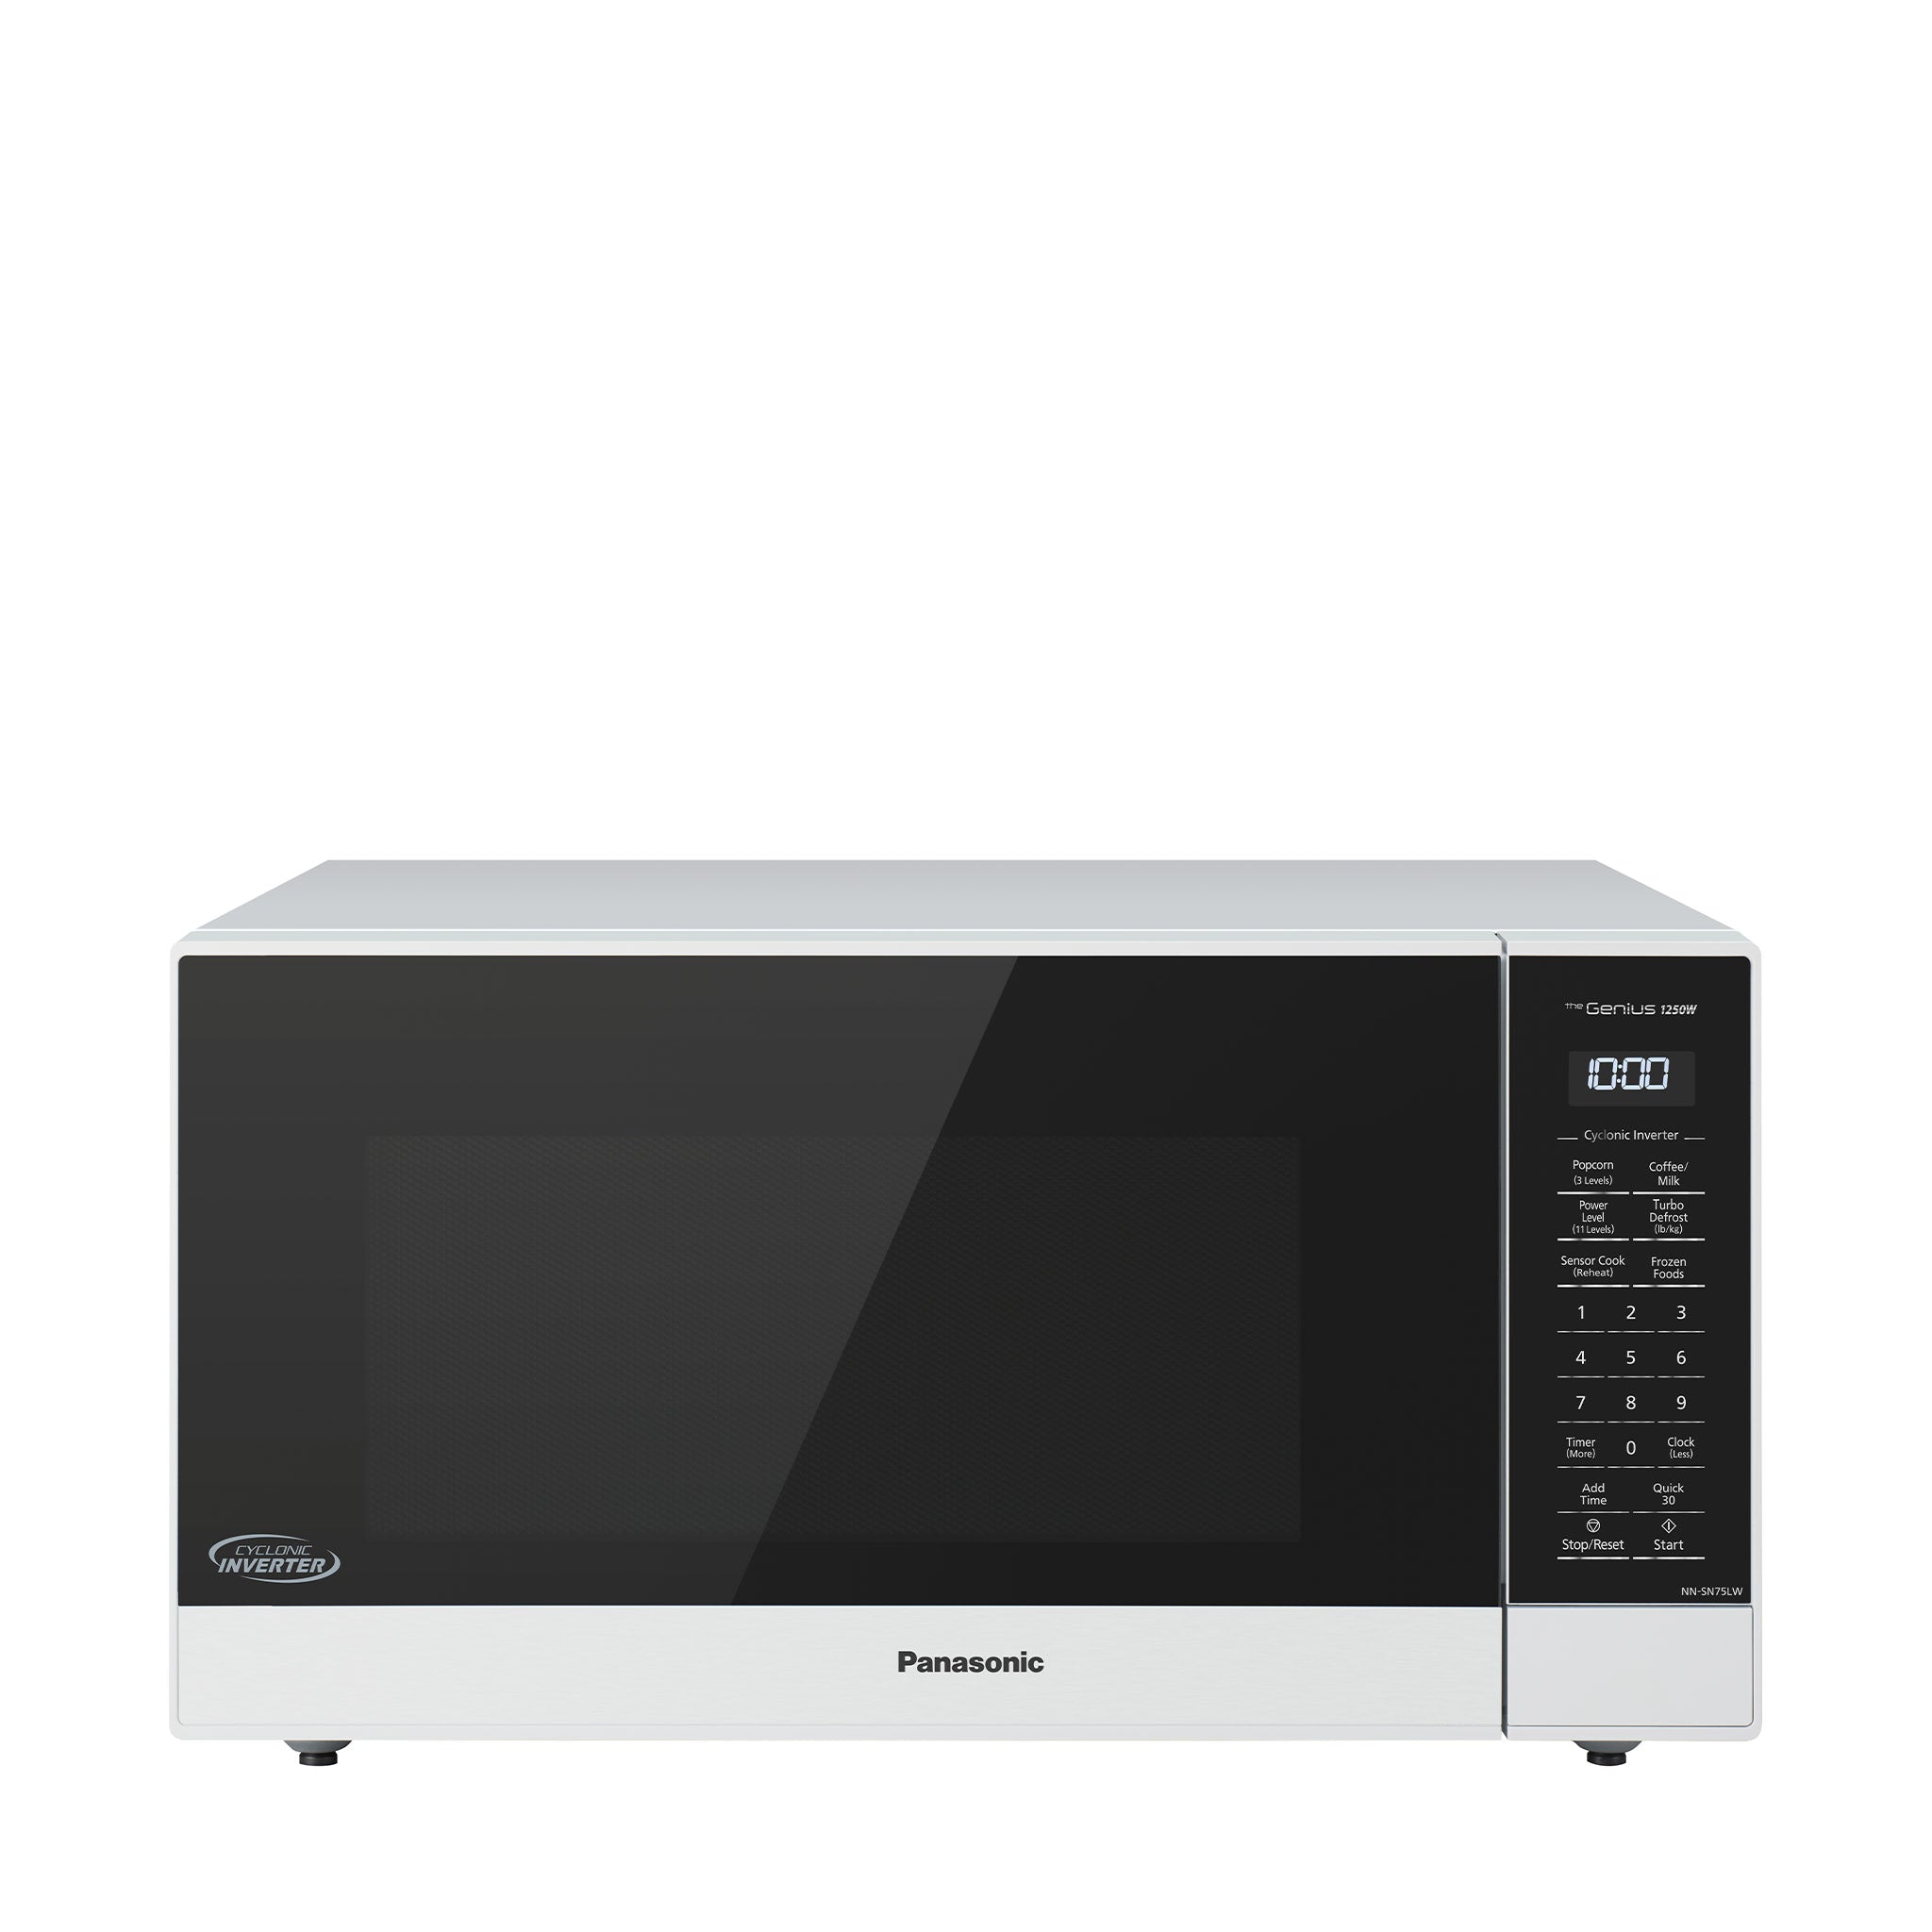 Panasonic Microwave Oven with Inverter Technology 1.6 cu. ft. 1250 